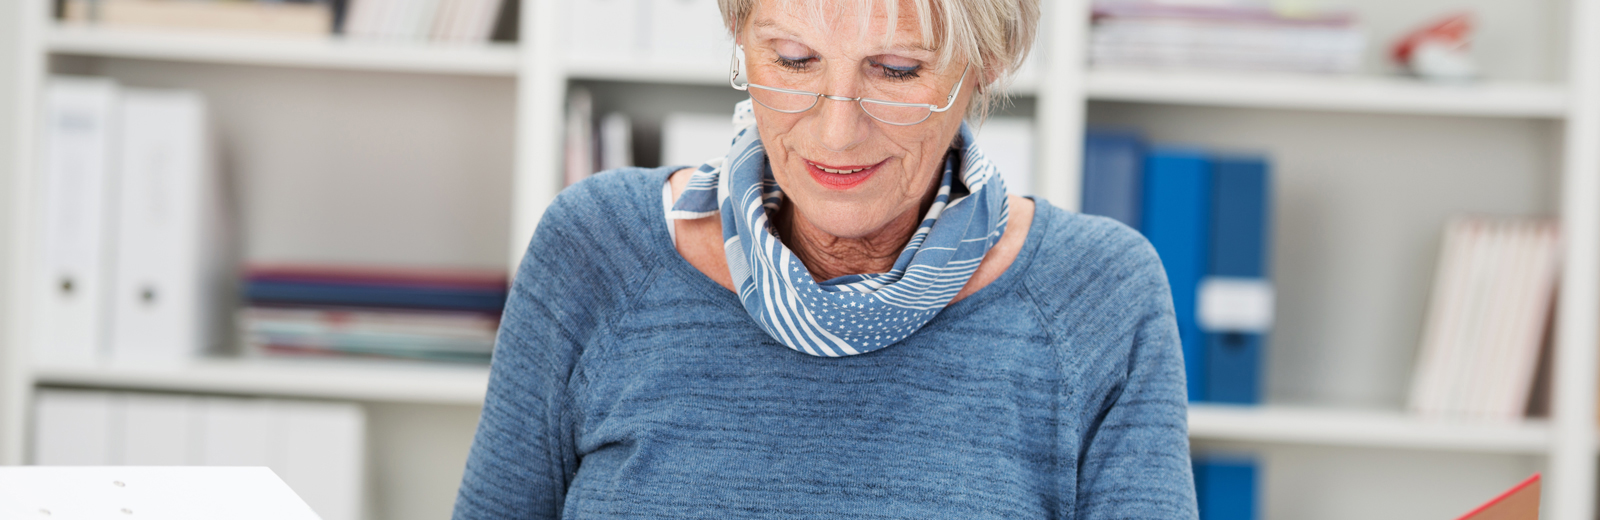 Older woman looks down at papers